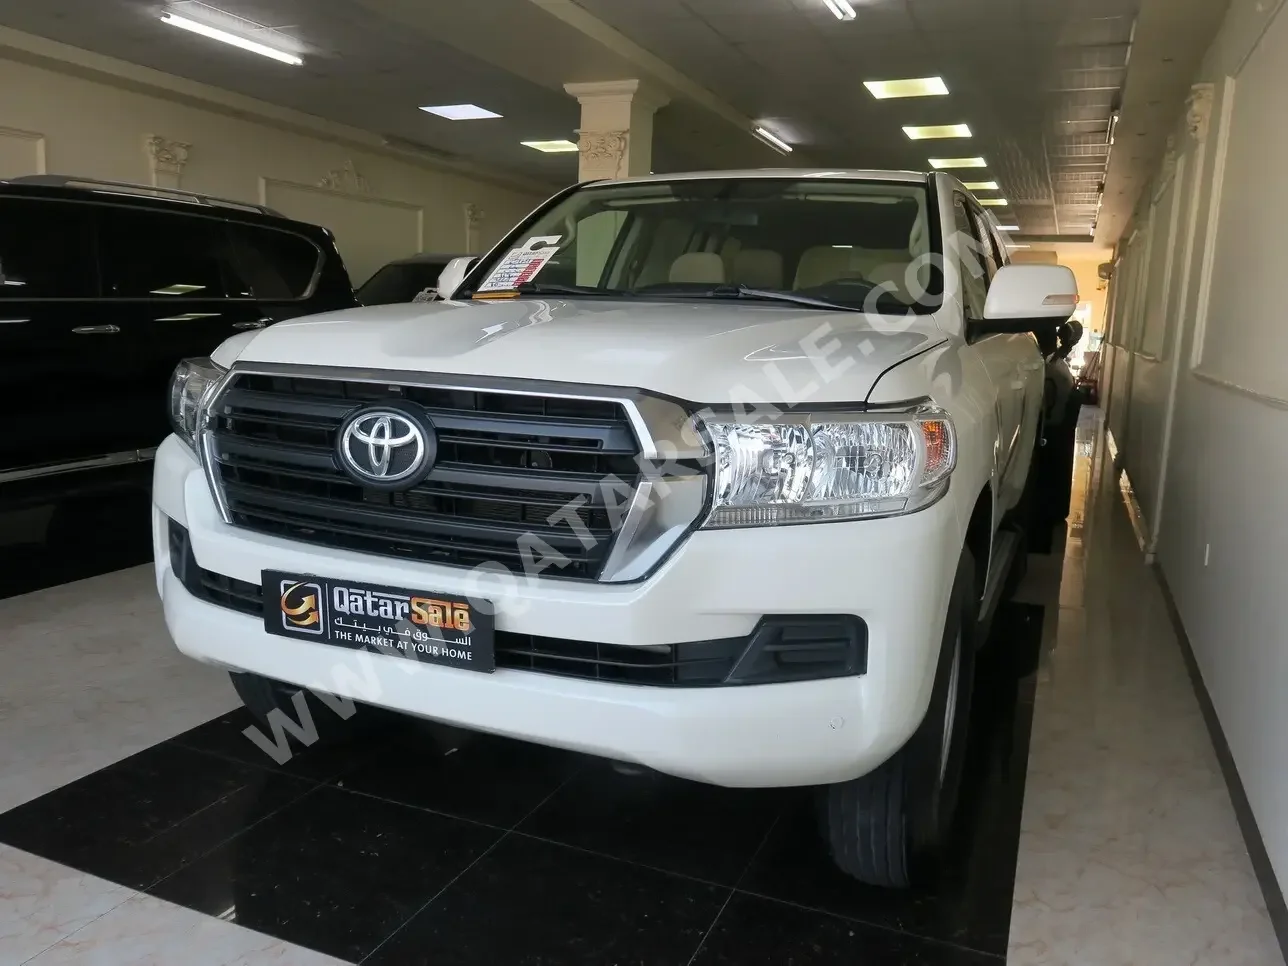  Toyota  Land Cruiser  GX  2020  Automatic  116,000 Km  6 Cylinder  Four Wheel Drive (4WD)  SUV  White  With Warranty